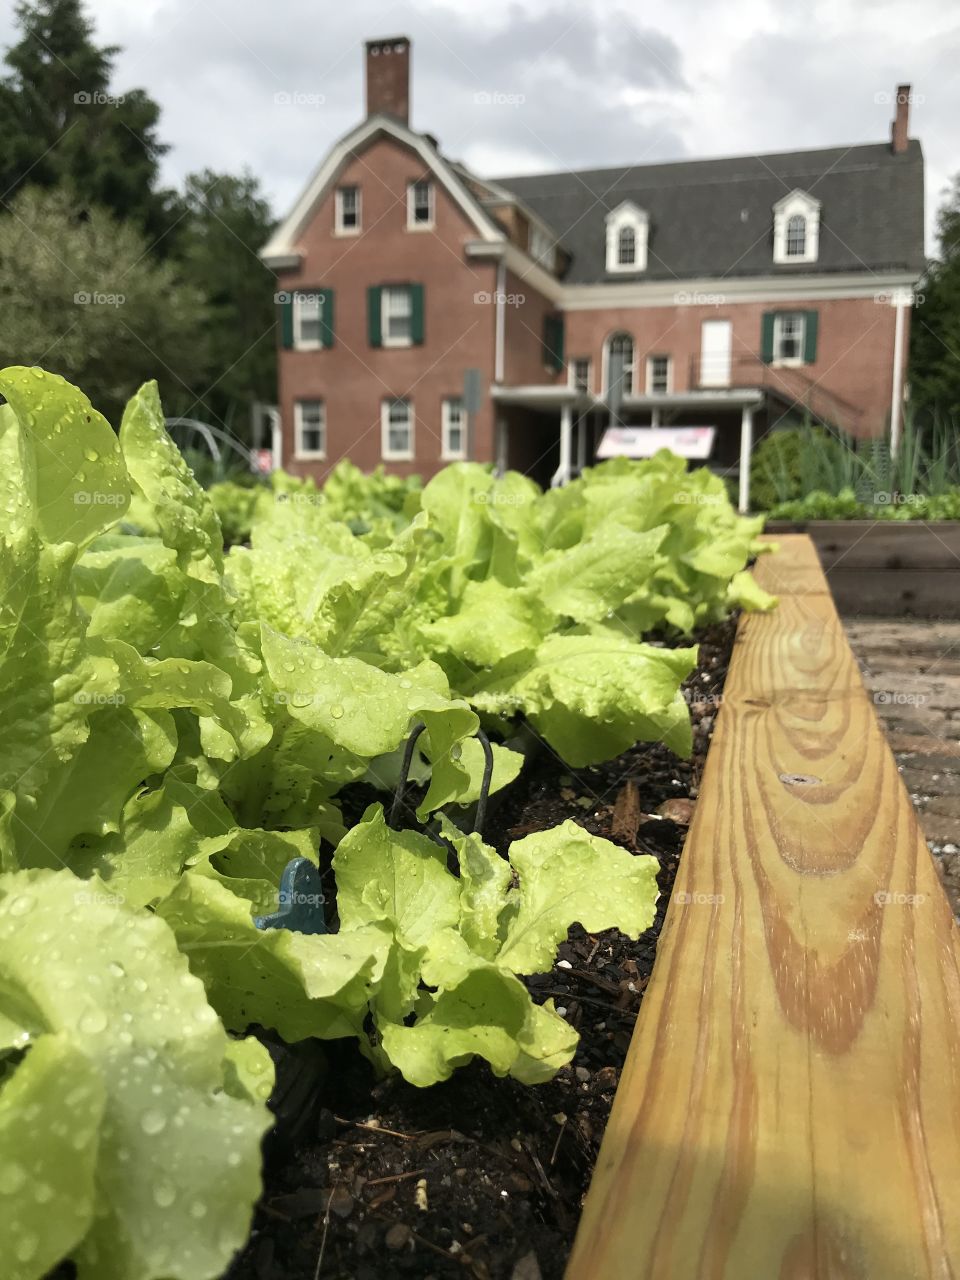 Rain drops on lettuce in a community garden with historic house in the background in Brevard, NC